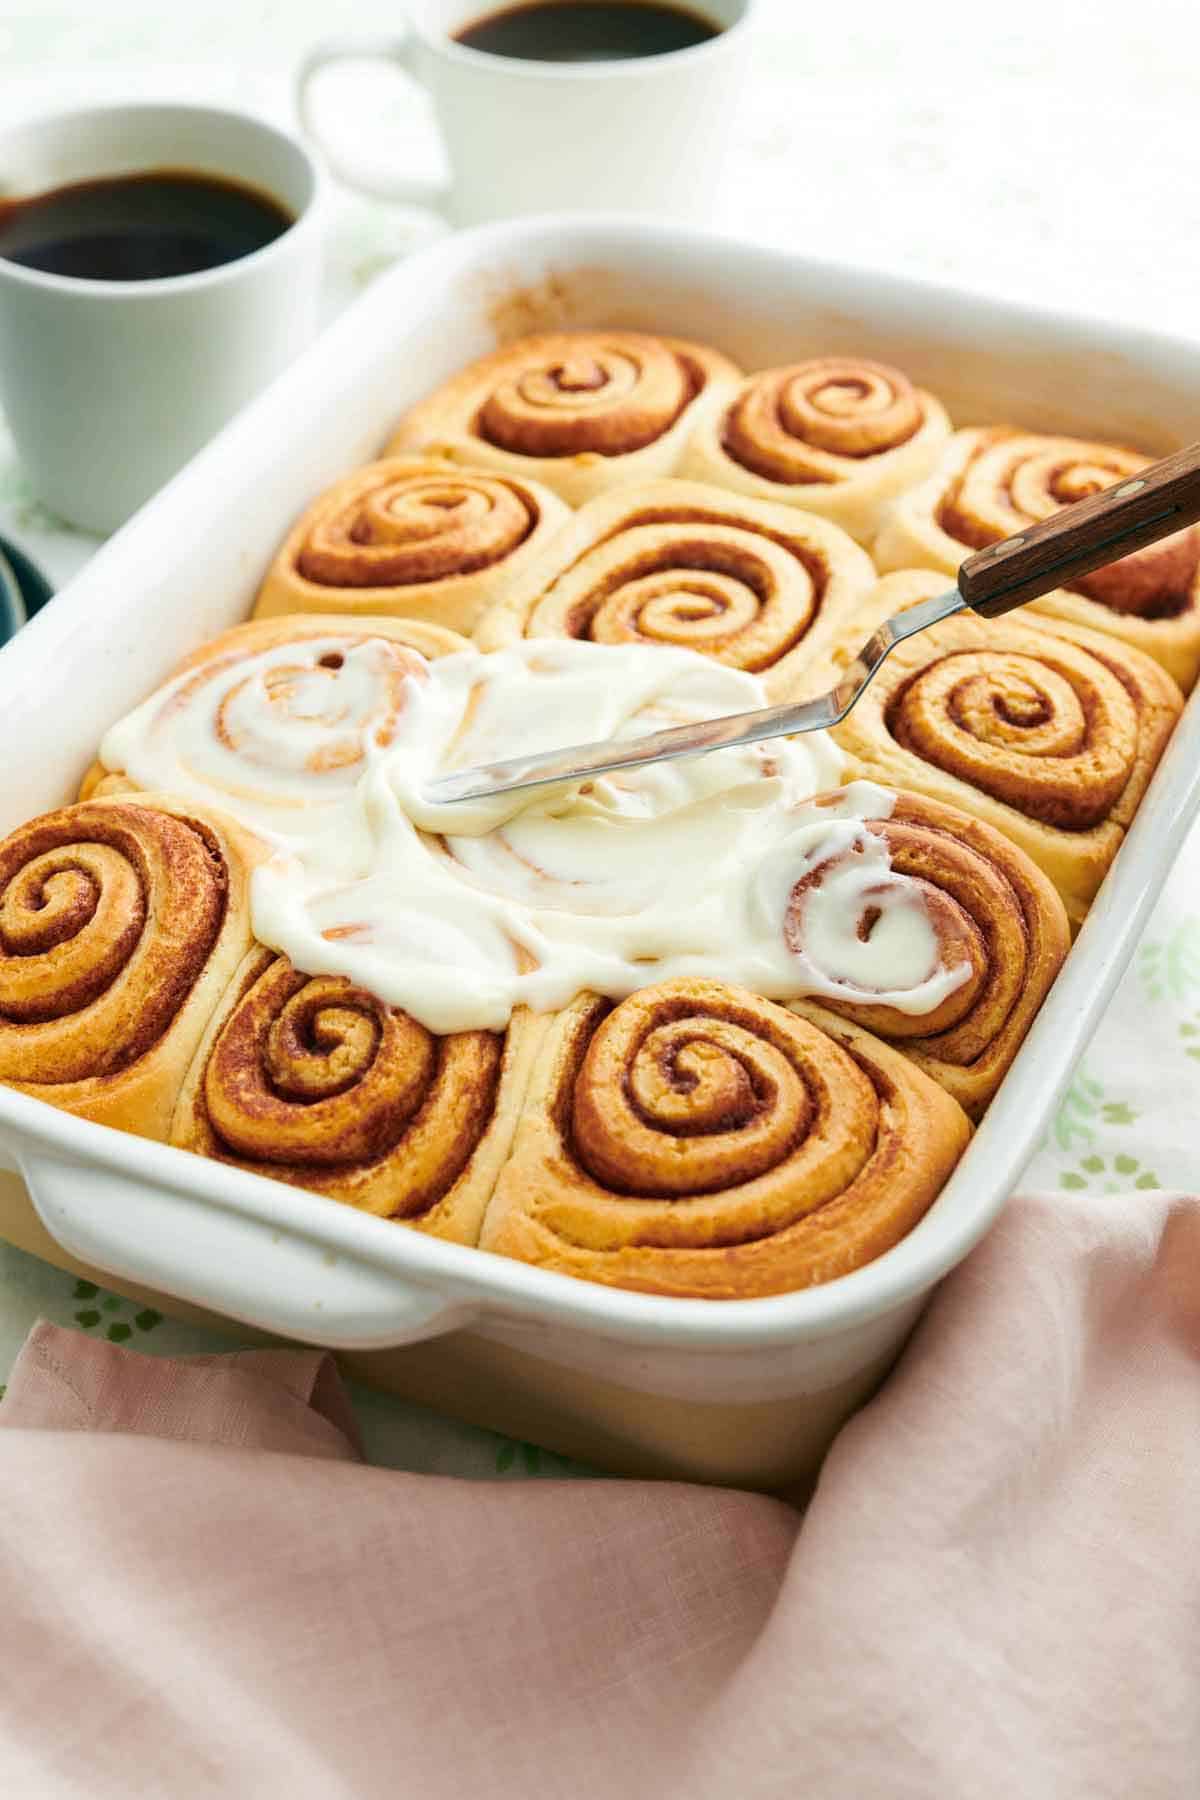 Icing spread on top of cinnamon rolls in a baking dish.